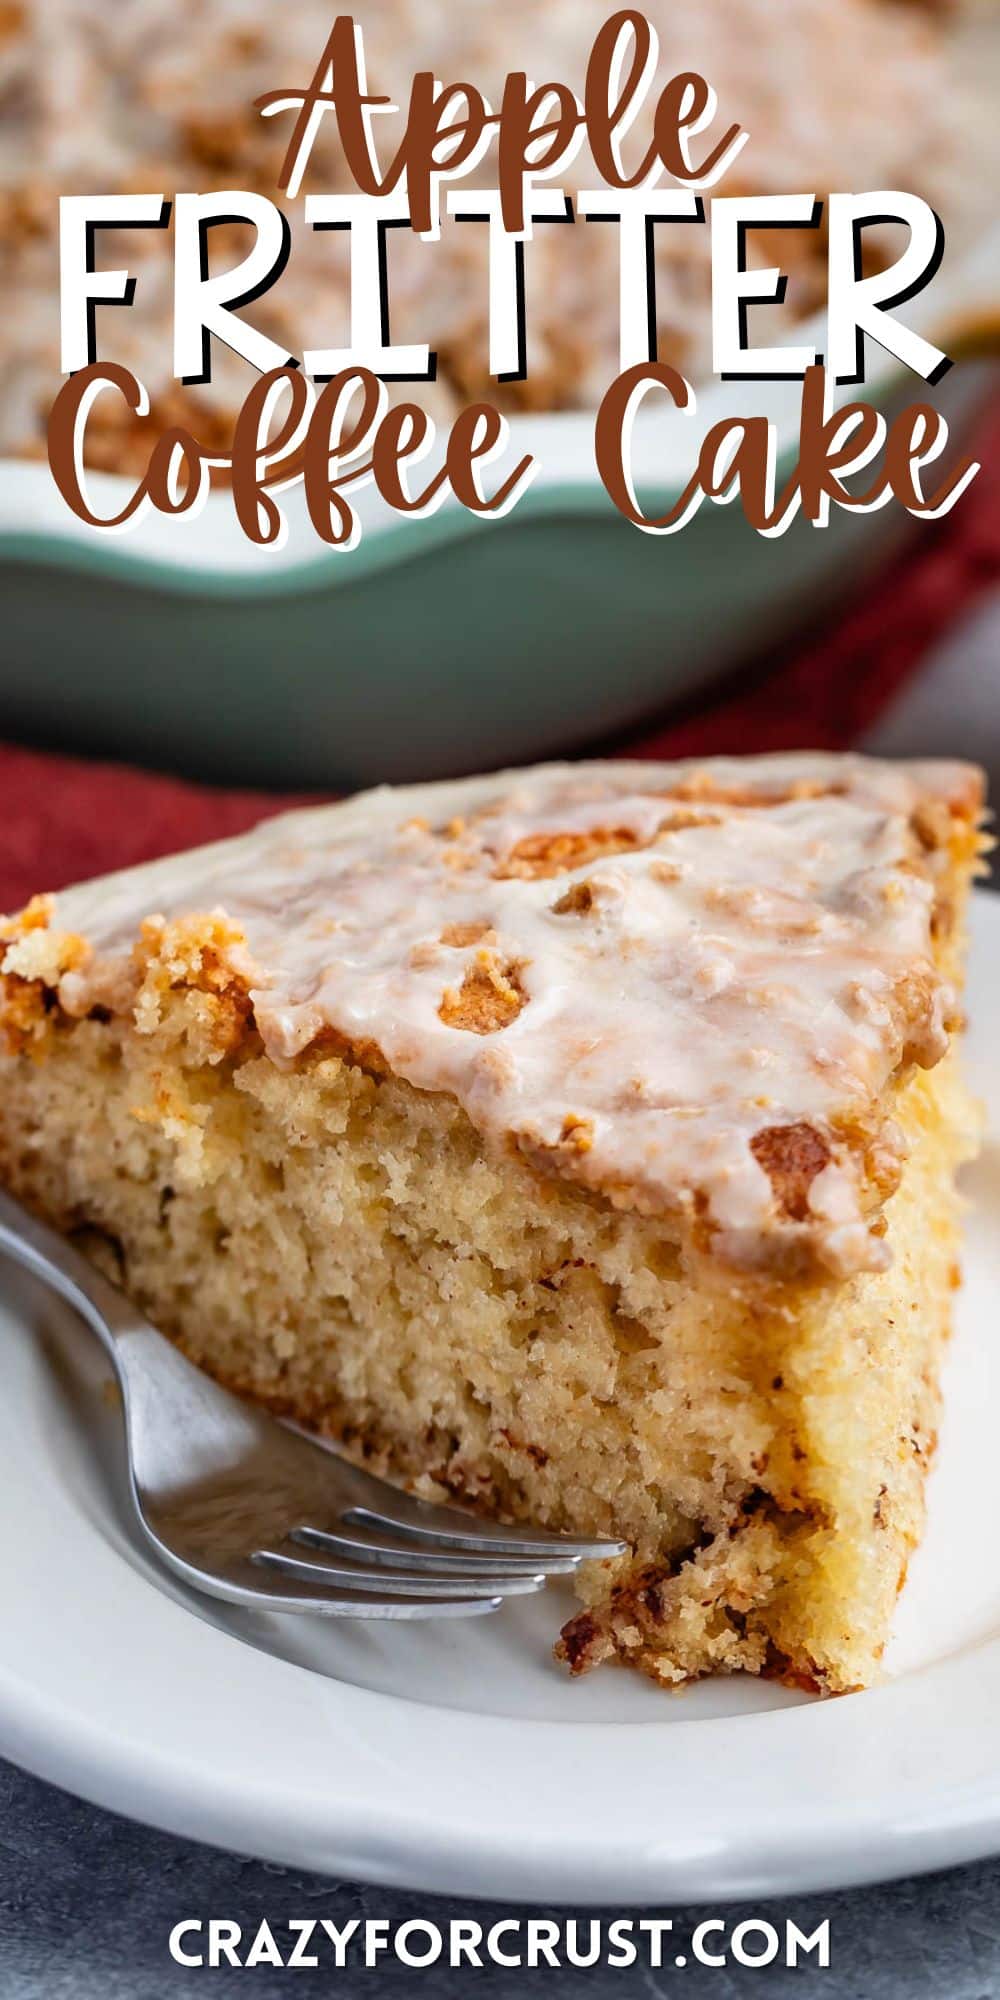 apple fritter coffee cake in a white pan with glaze on top with words on the image.